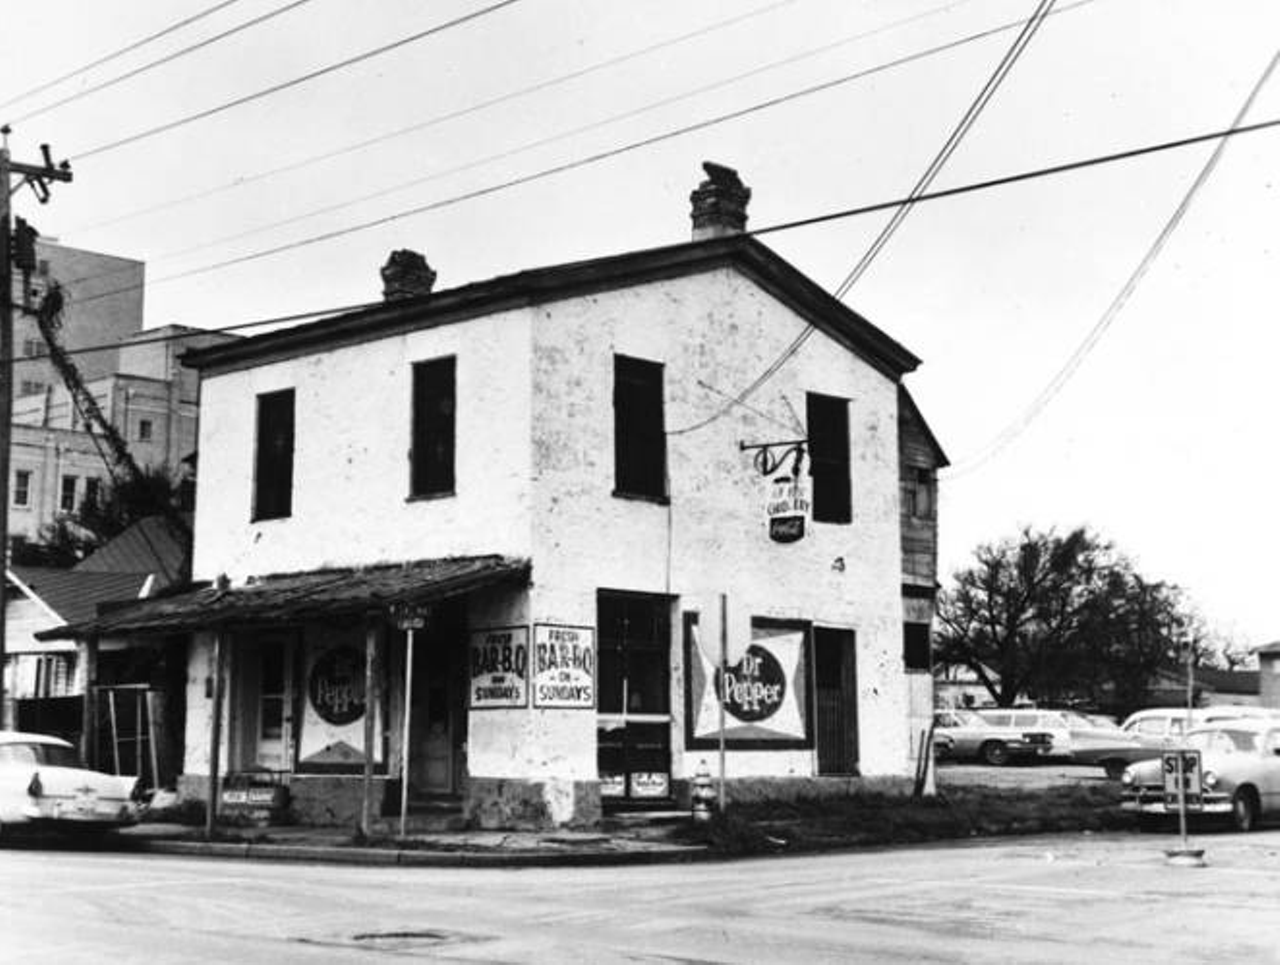 The '60s were definitely a time for mom-and-pop businesses. El Faro Grocery stood at 325 North Santa Rosa Avenue and was housed in a two-story 19th century limestone building. Check out the sign for the fresh bar-b-q on Sundays.